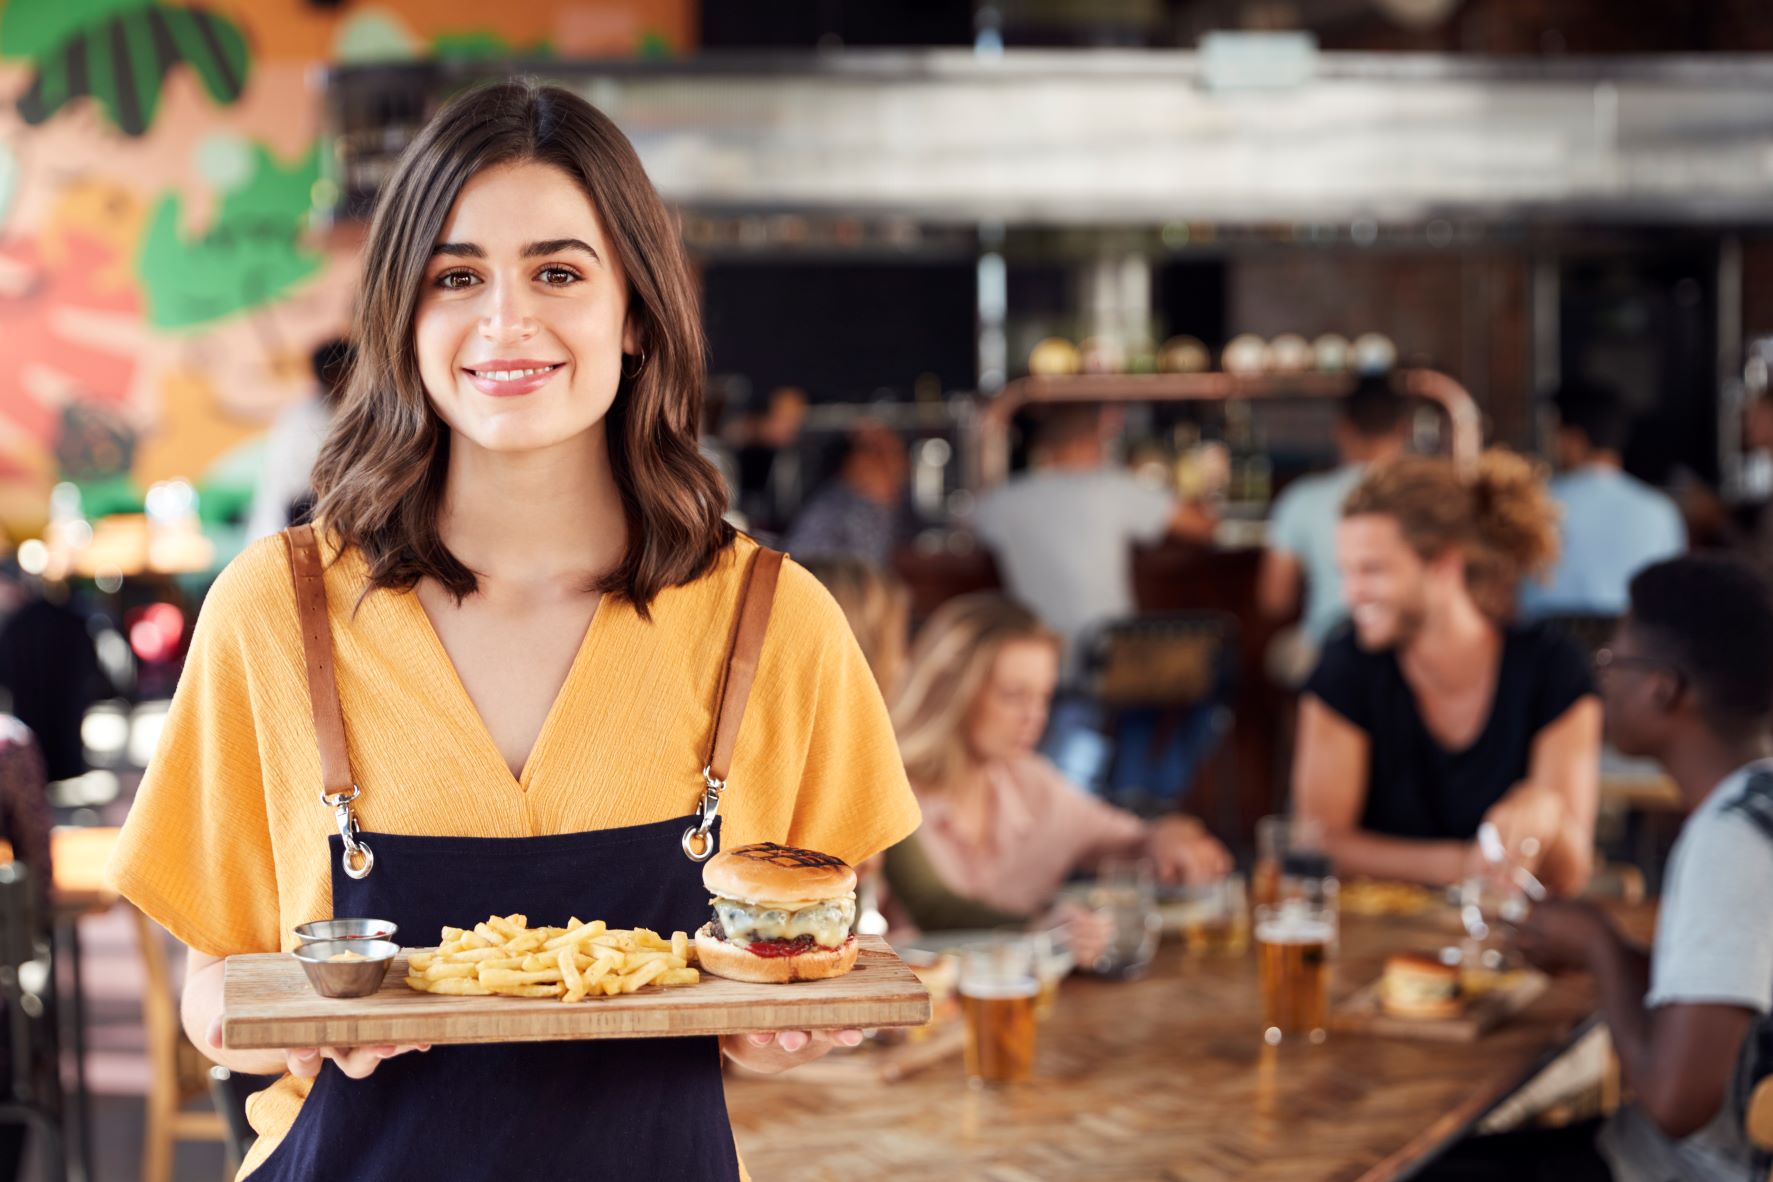 portrait-of-waitress-serving-food-to-customers-in-2021-08-26-16-14-53-utc